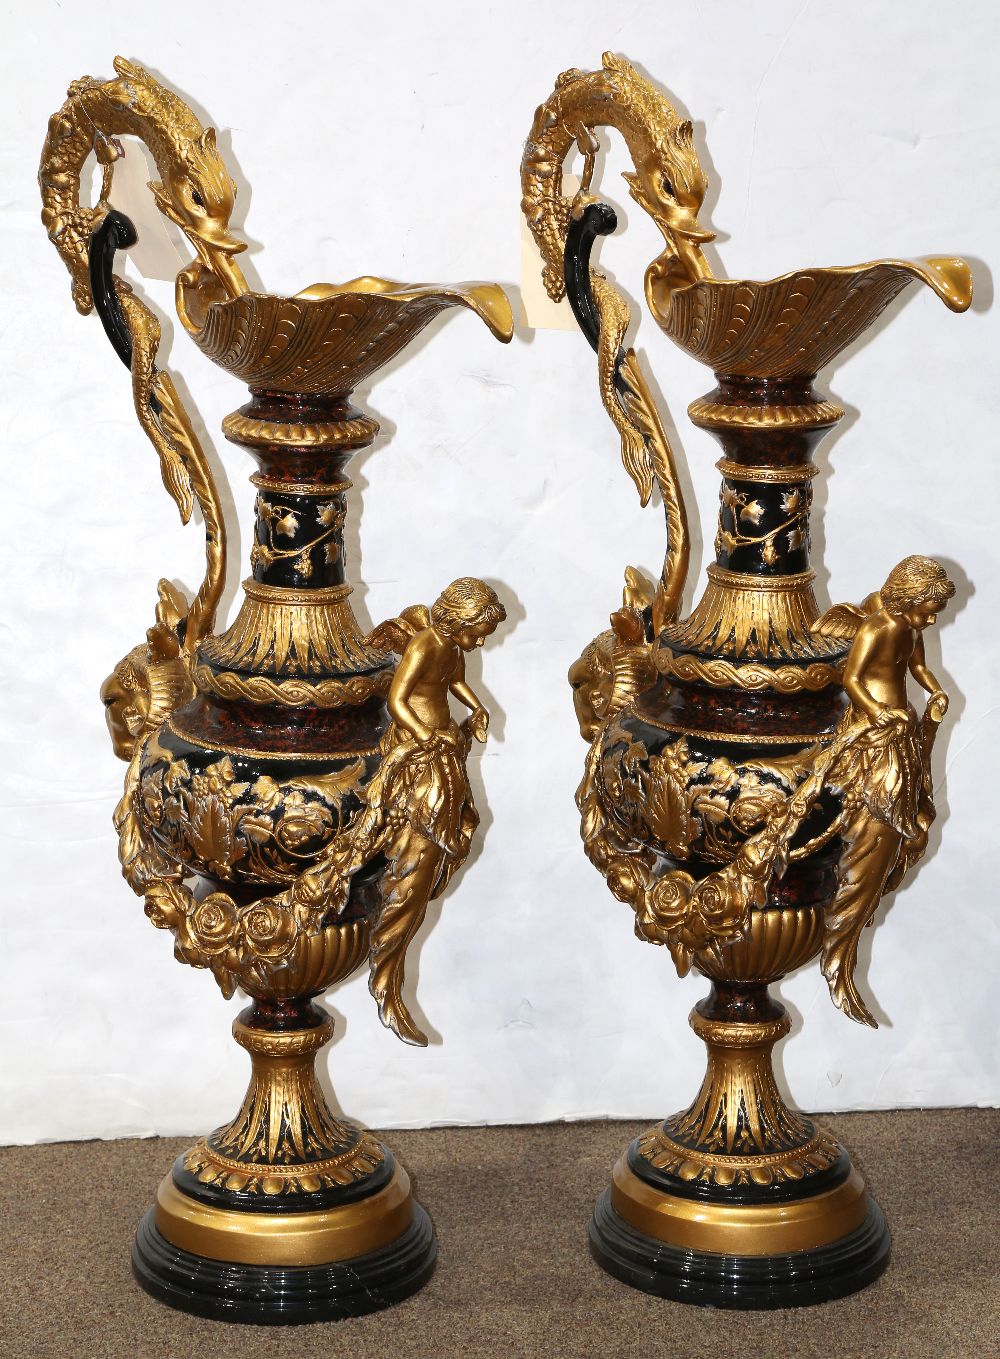 Pair of monumental Neoclassical style ewers, each having a dolphin form handle, above the